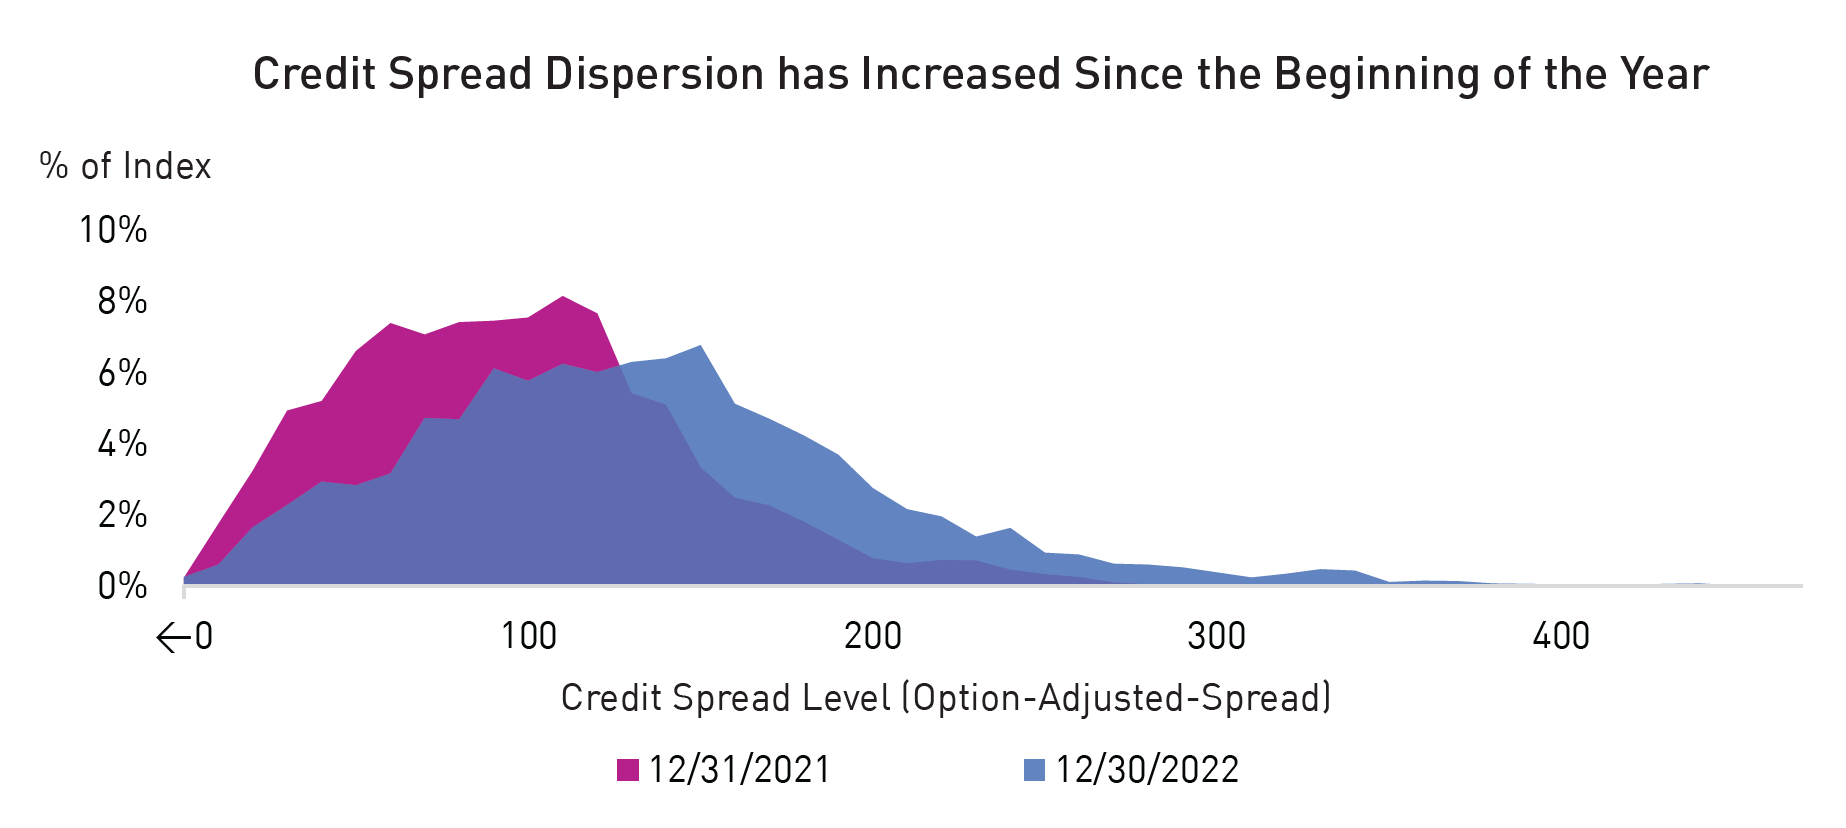 Credit Spread Dispersion has Increased Since the Beginning of the Year